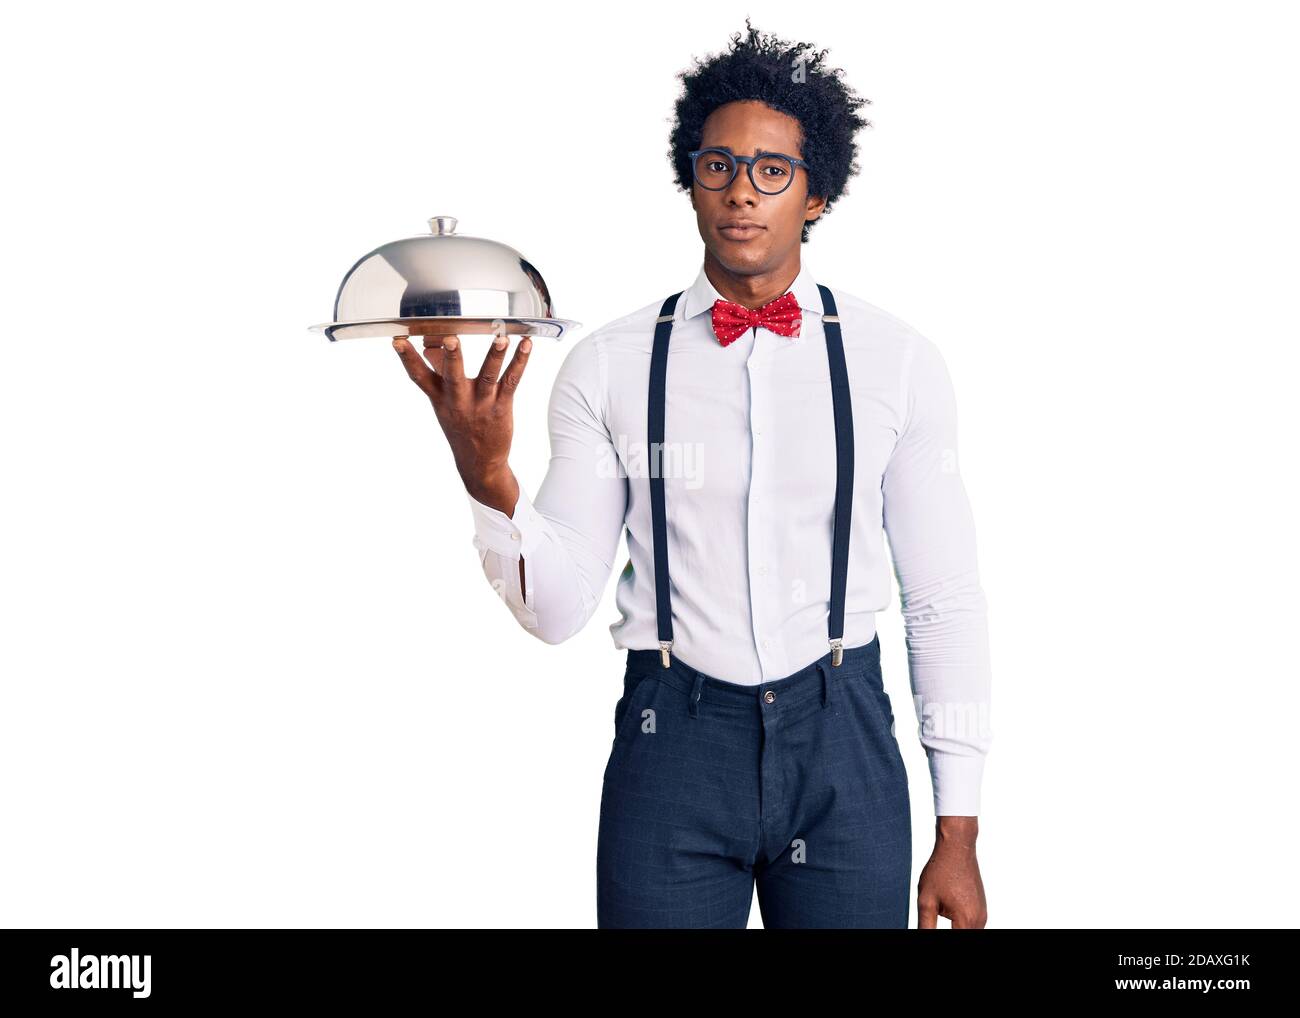 Handsome african american man with afro hair wearing waiter uniform holding  silver tray thinking attitude and sober expression looking self confident  Stock Photo - Alamy